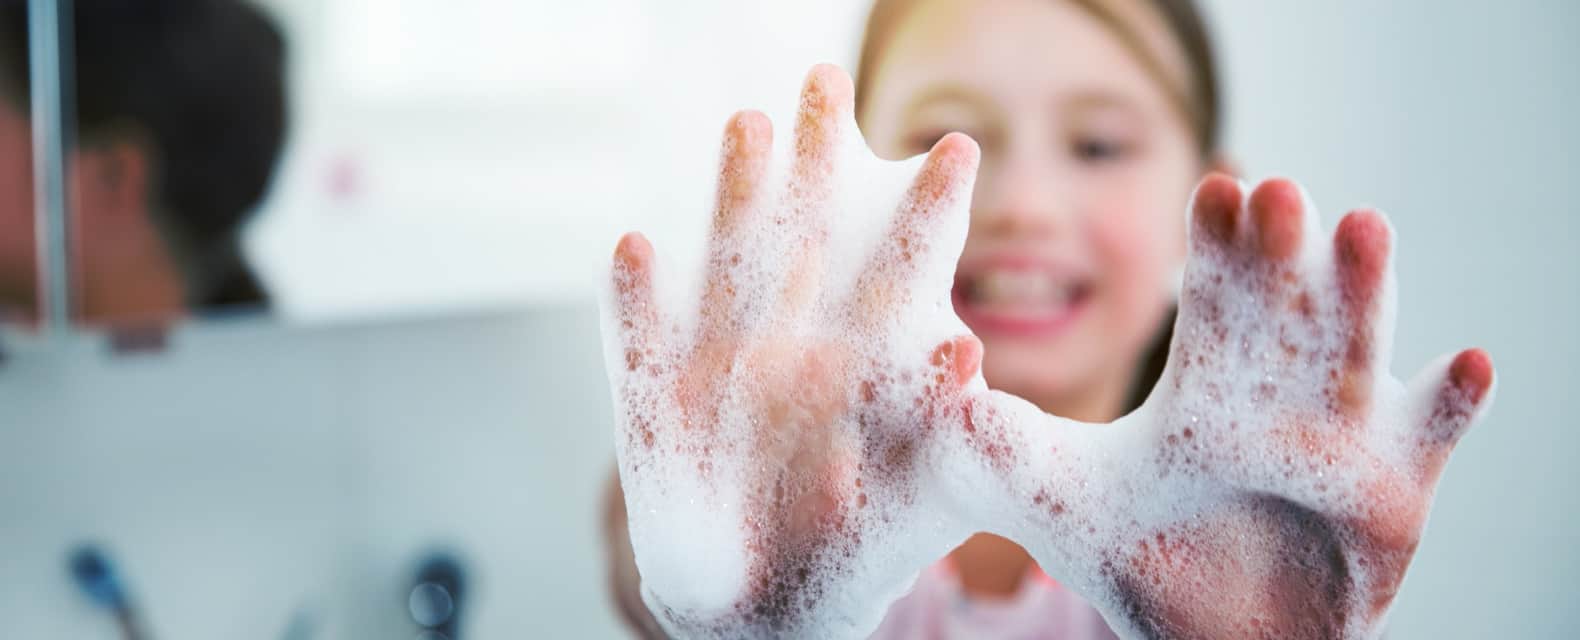 Image of hand washing in a school environment